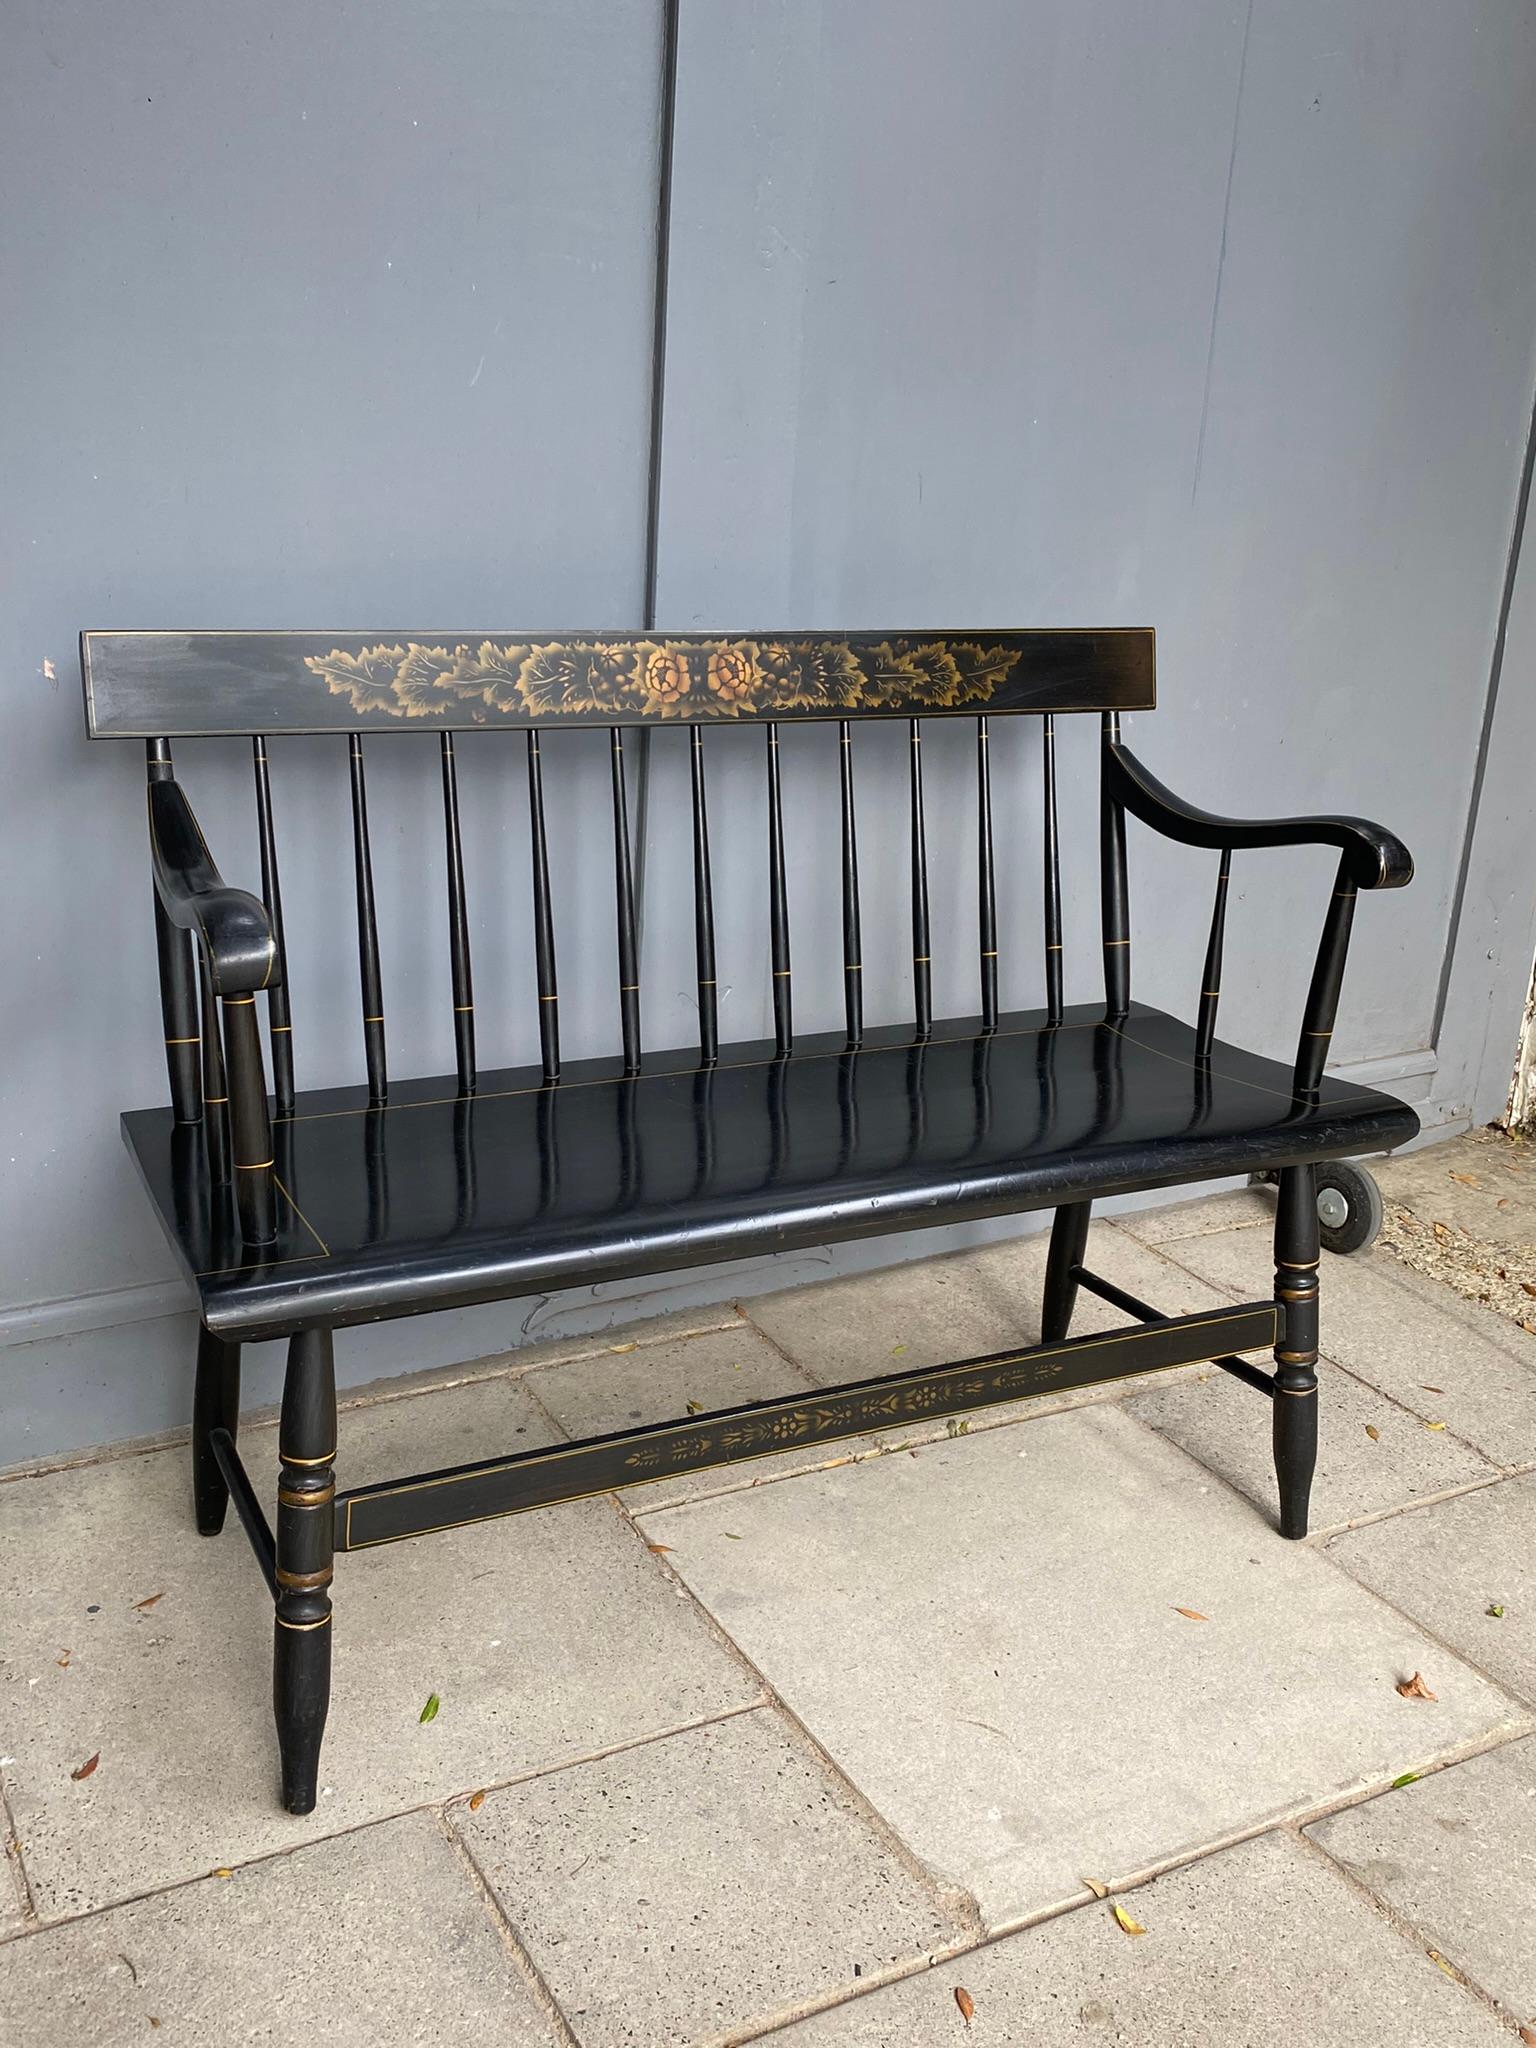 Lacquered American Colonial L. Hitchcock Solid Maple Black Harvest Deacons Bench, C. 1950s